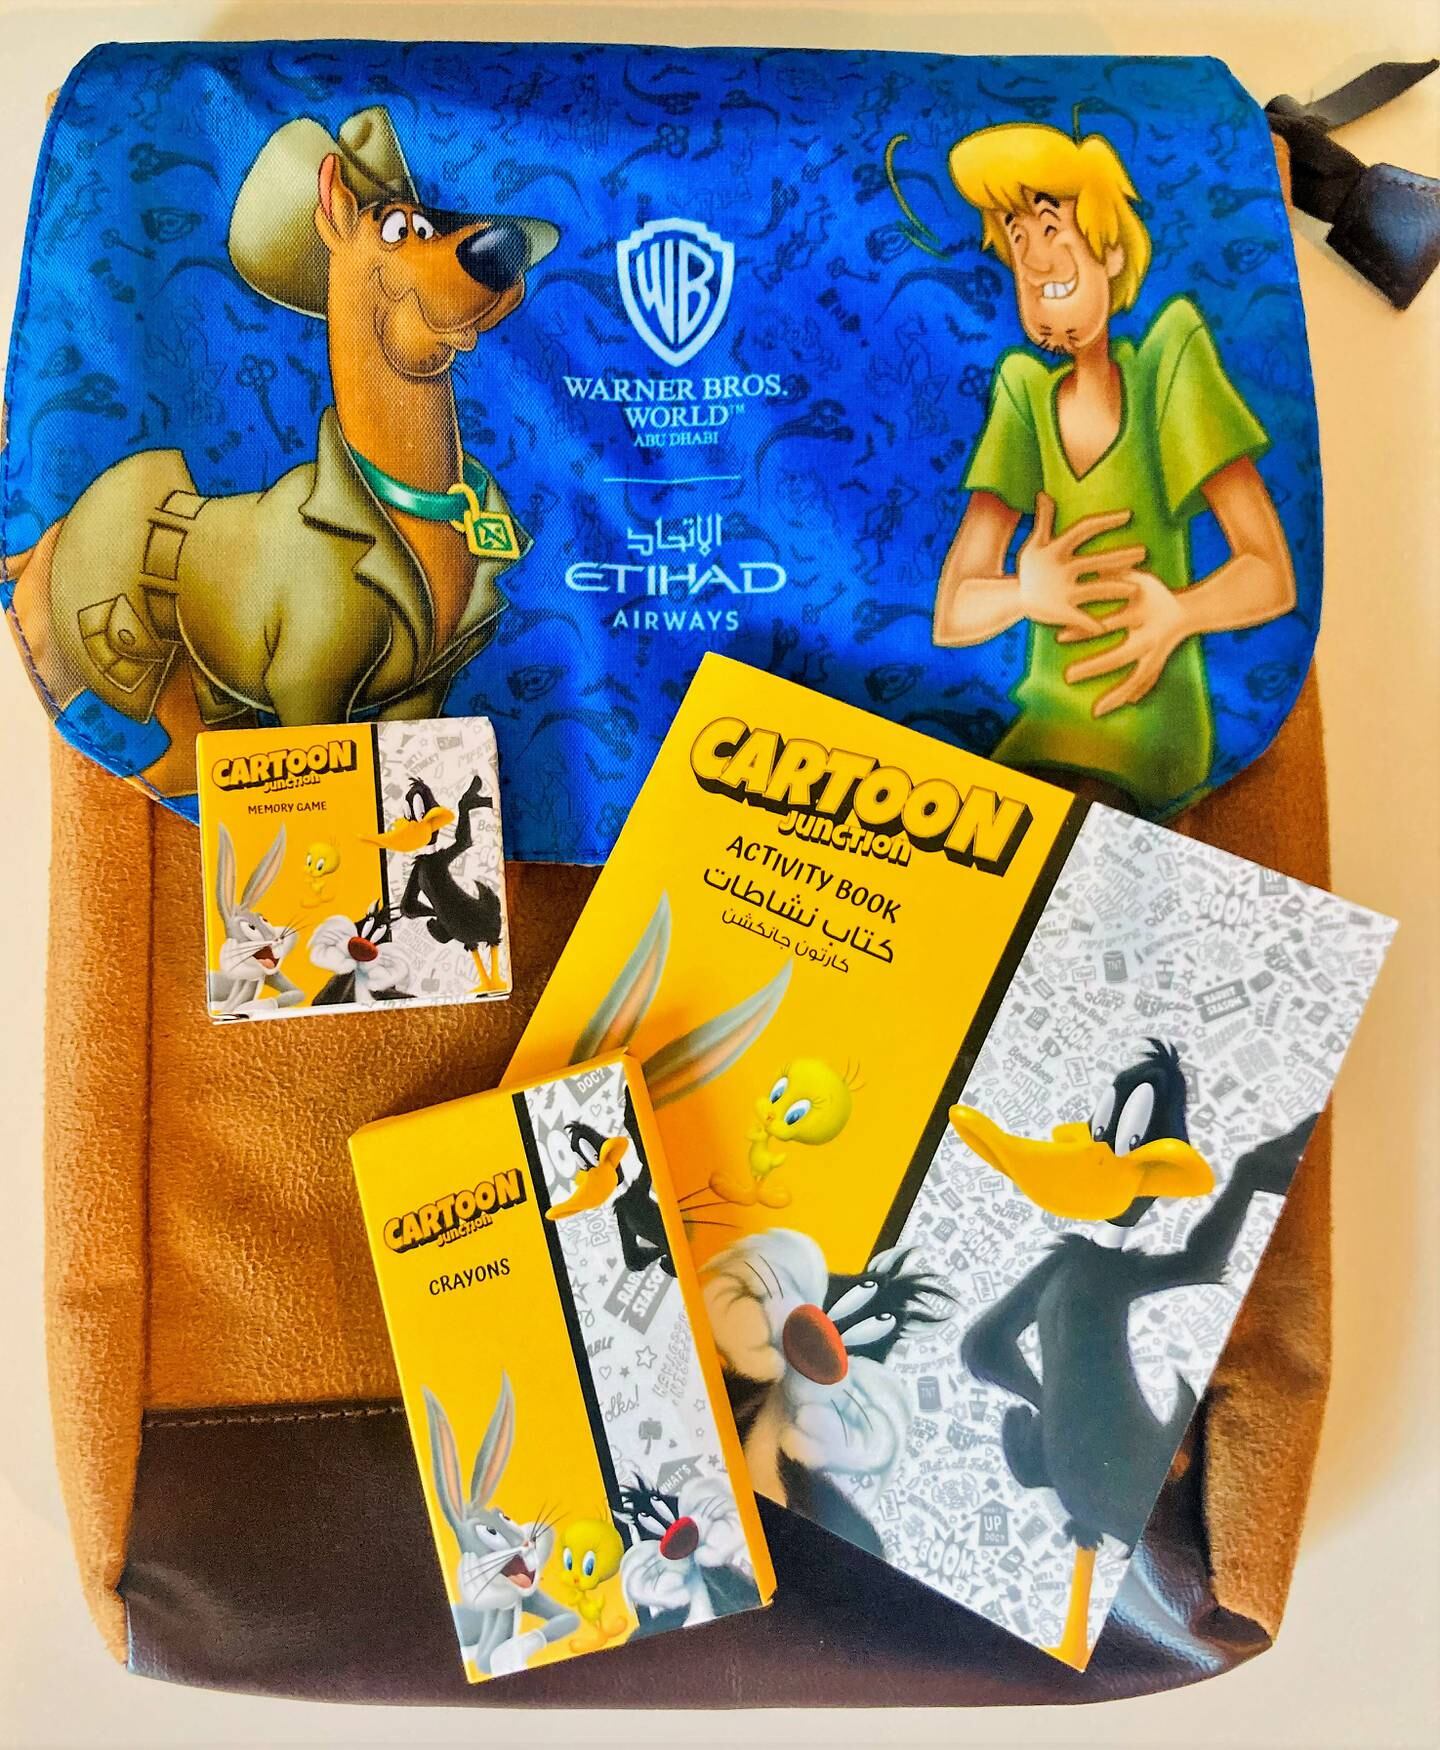 Little VIP travellers' flying Etihad receive Looney Tunes and Scooby-Doo themed activity packs.